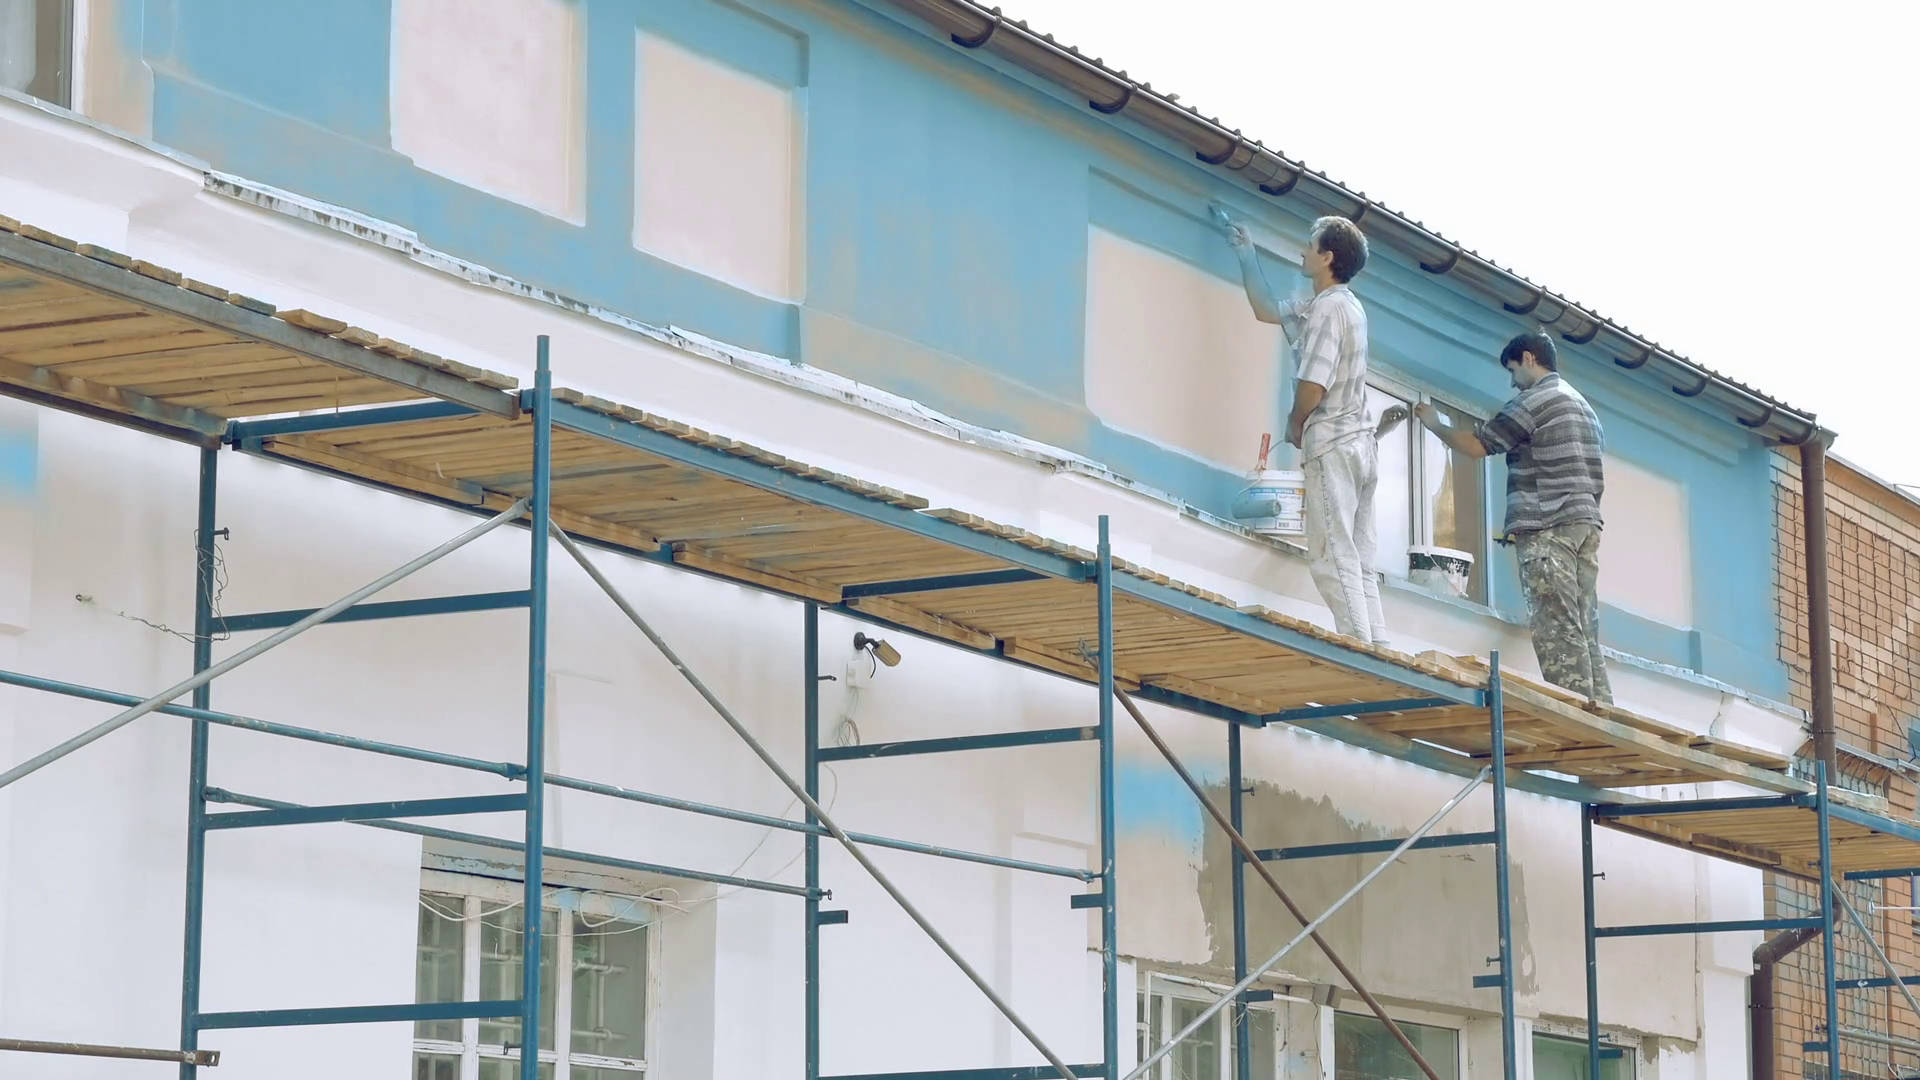 Professional Workers Painting By Paintbrush Building Wall In Blue Color Outdoors. House Painter Men At Work Action At Summer Day. - House Painter, Transparent background PNG HD thumbnail